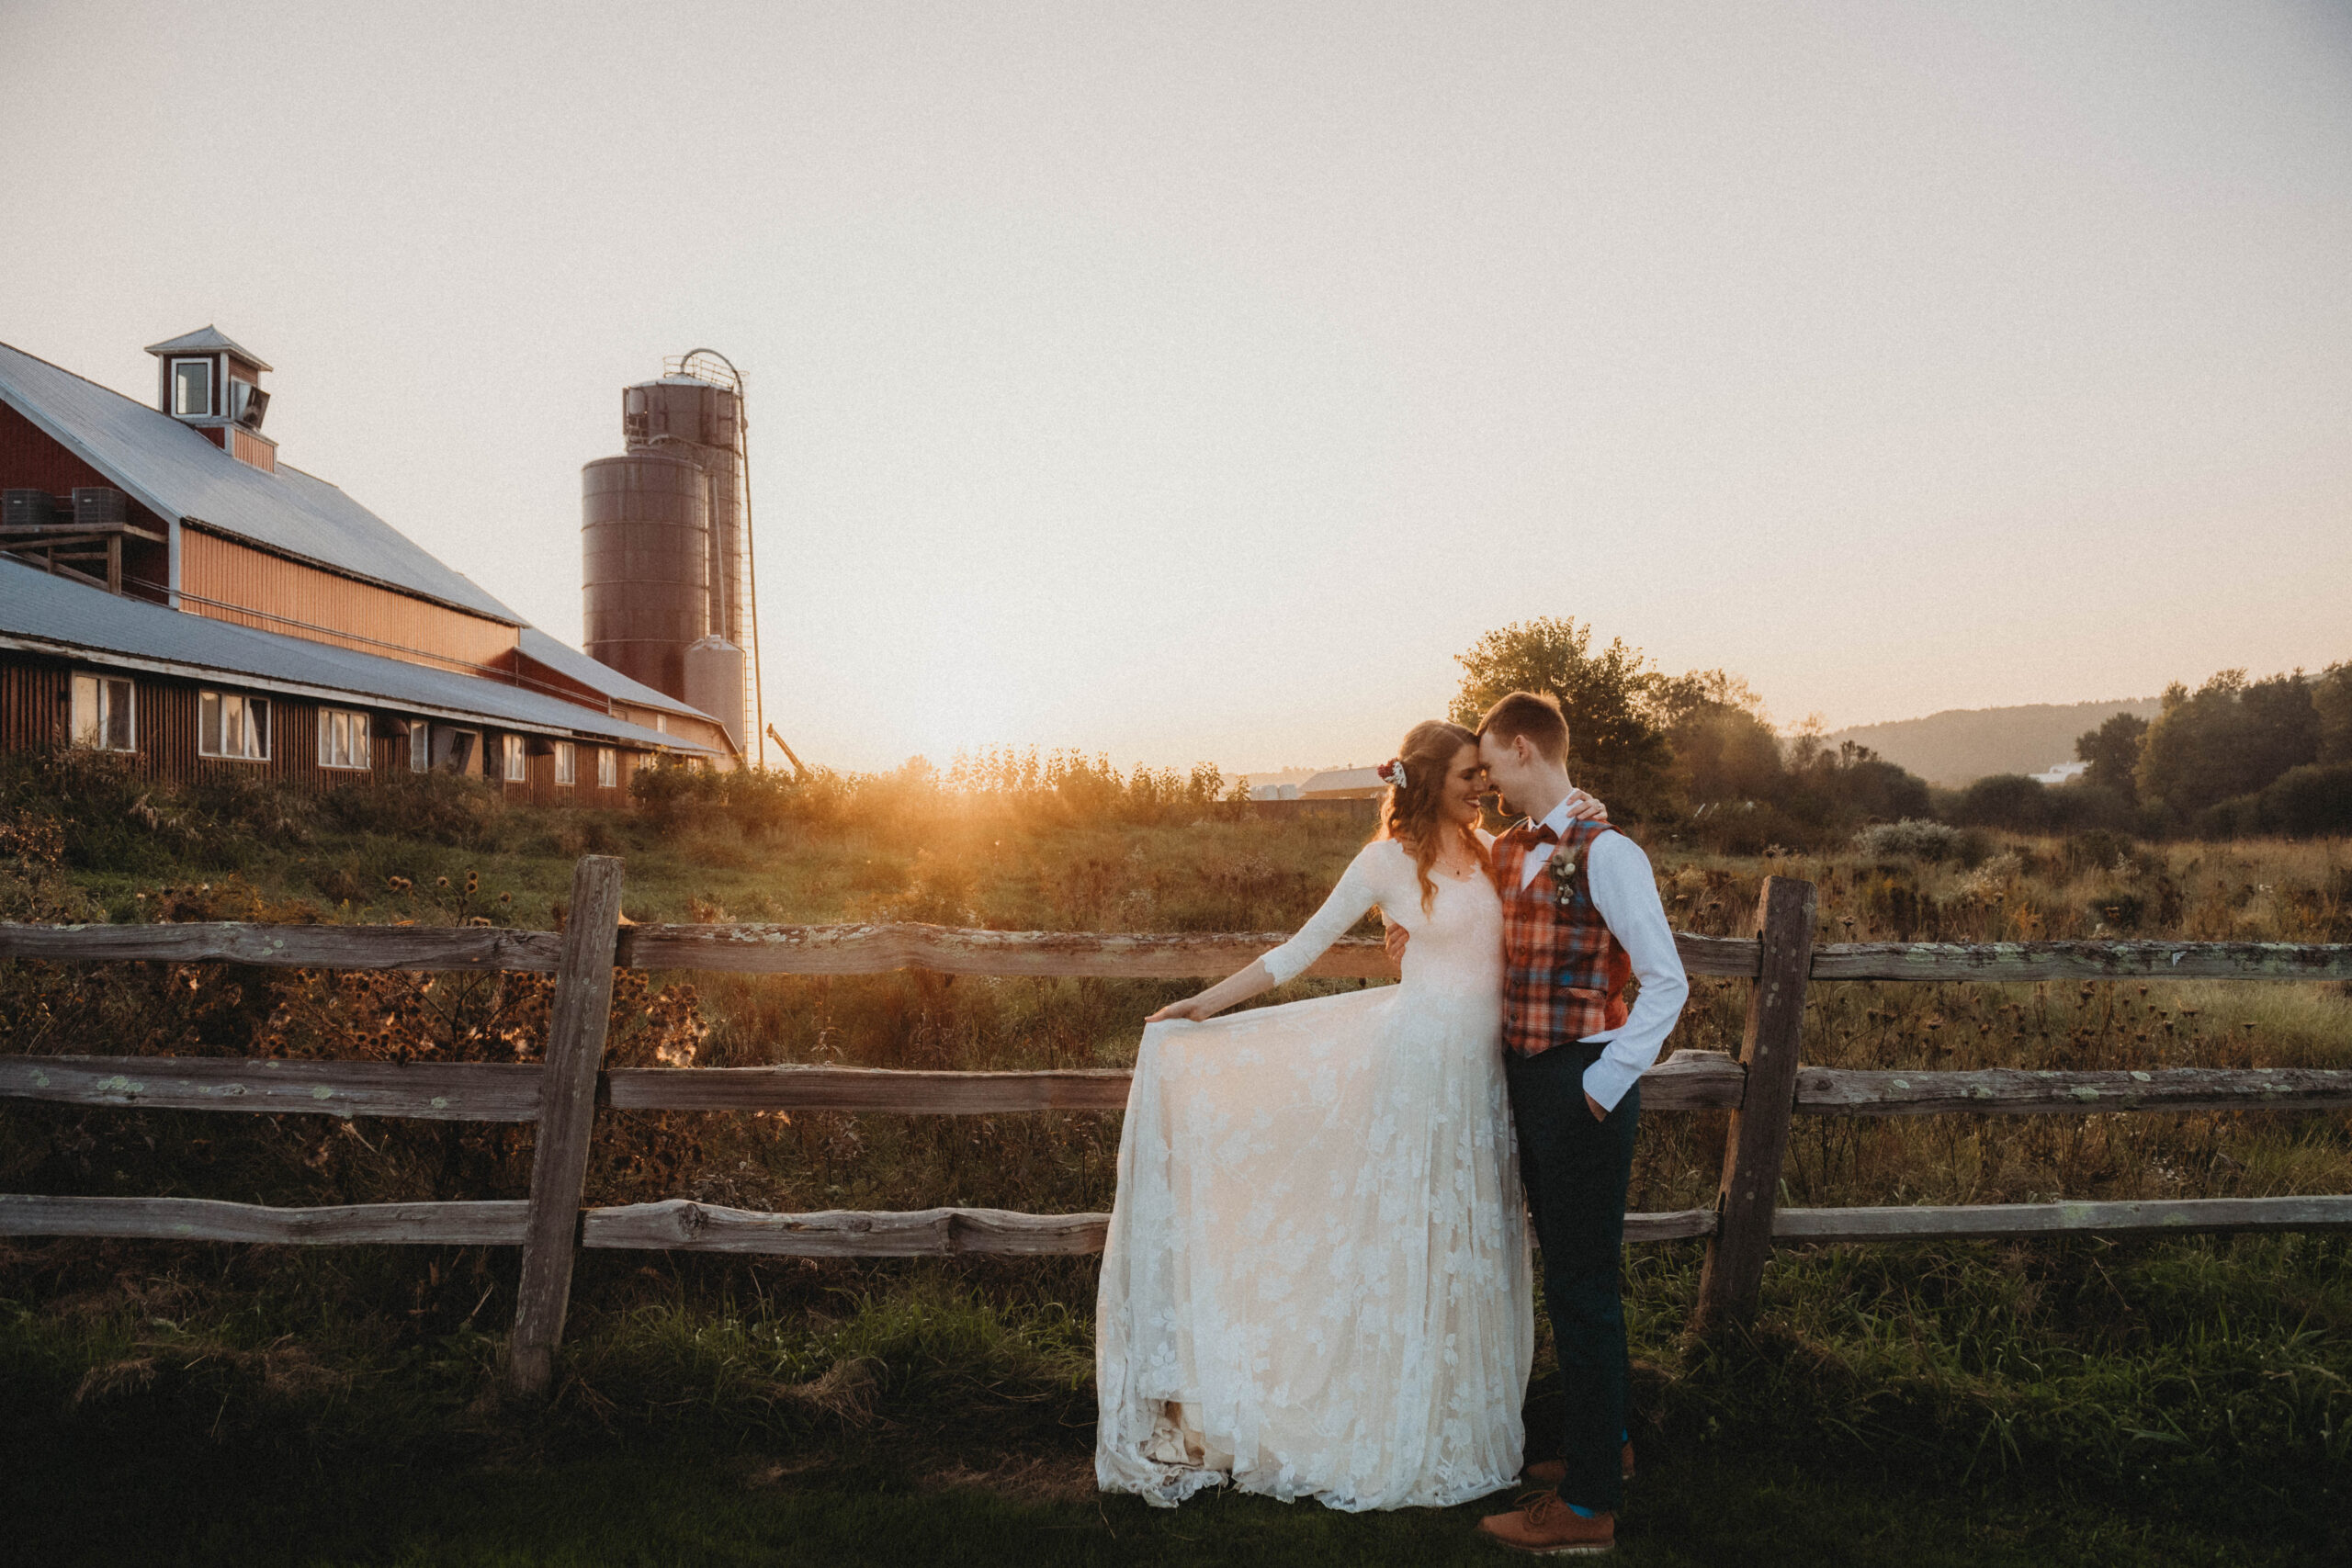 Emily and Sean standing together in front of the wedding barn at their farm wedding venue in Vermont